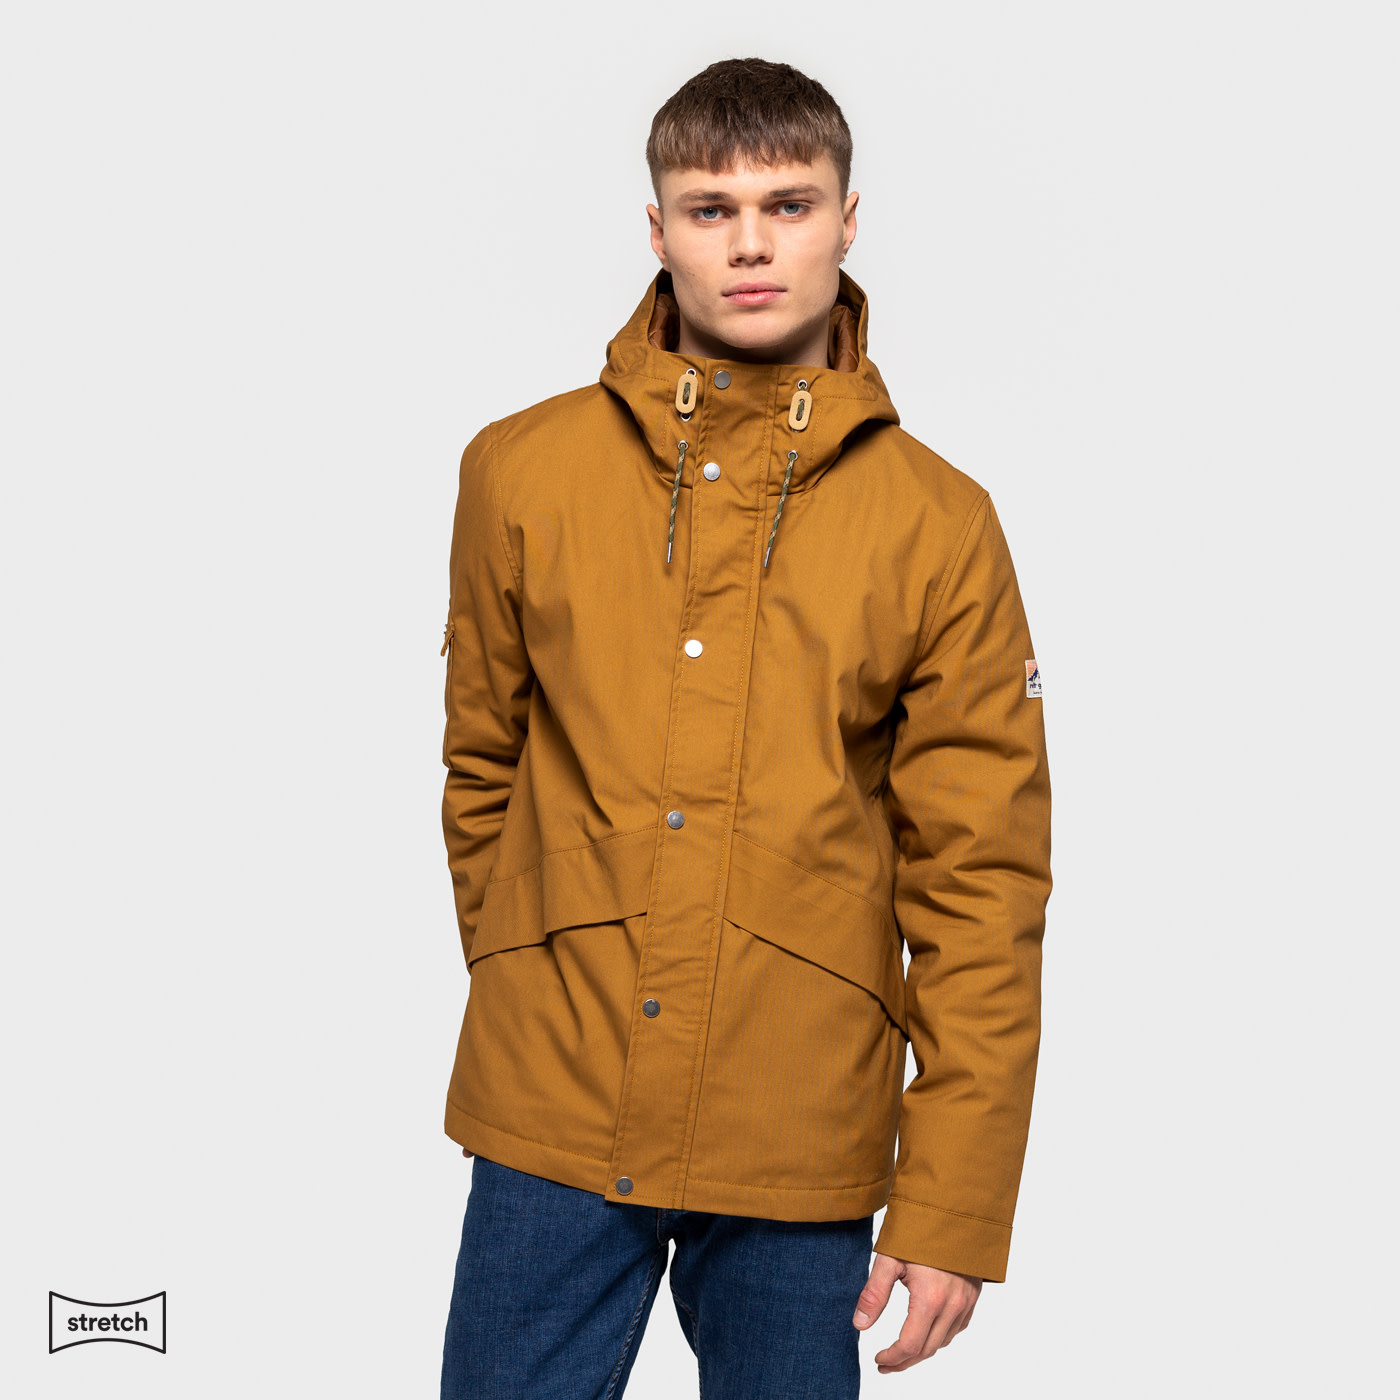 geroosterd brood ontsnappen wagon RVLT Parka 7626 - Schreter's Clothing Store